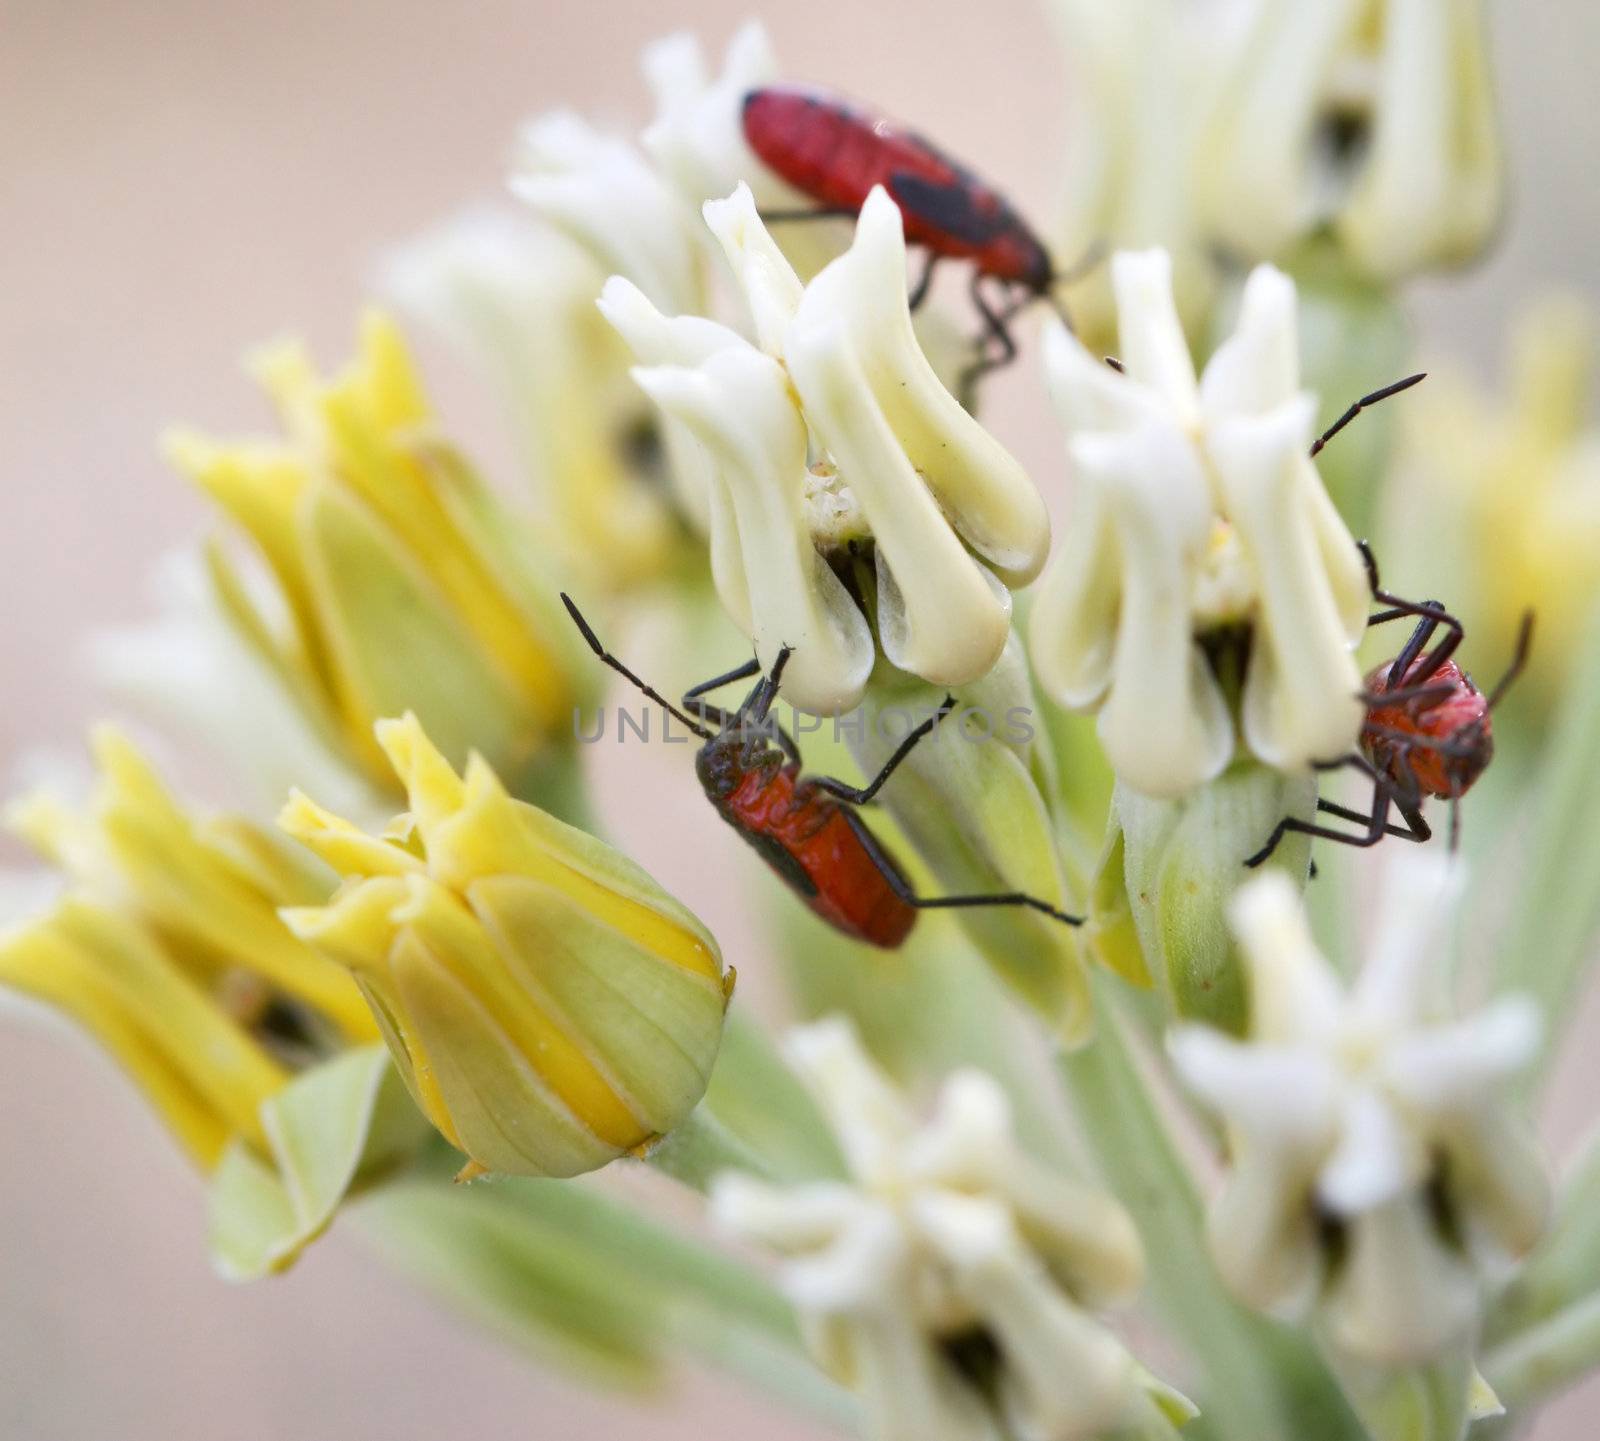 Red beatles crawling on flowers. Great macro shot with Canon 30D